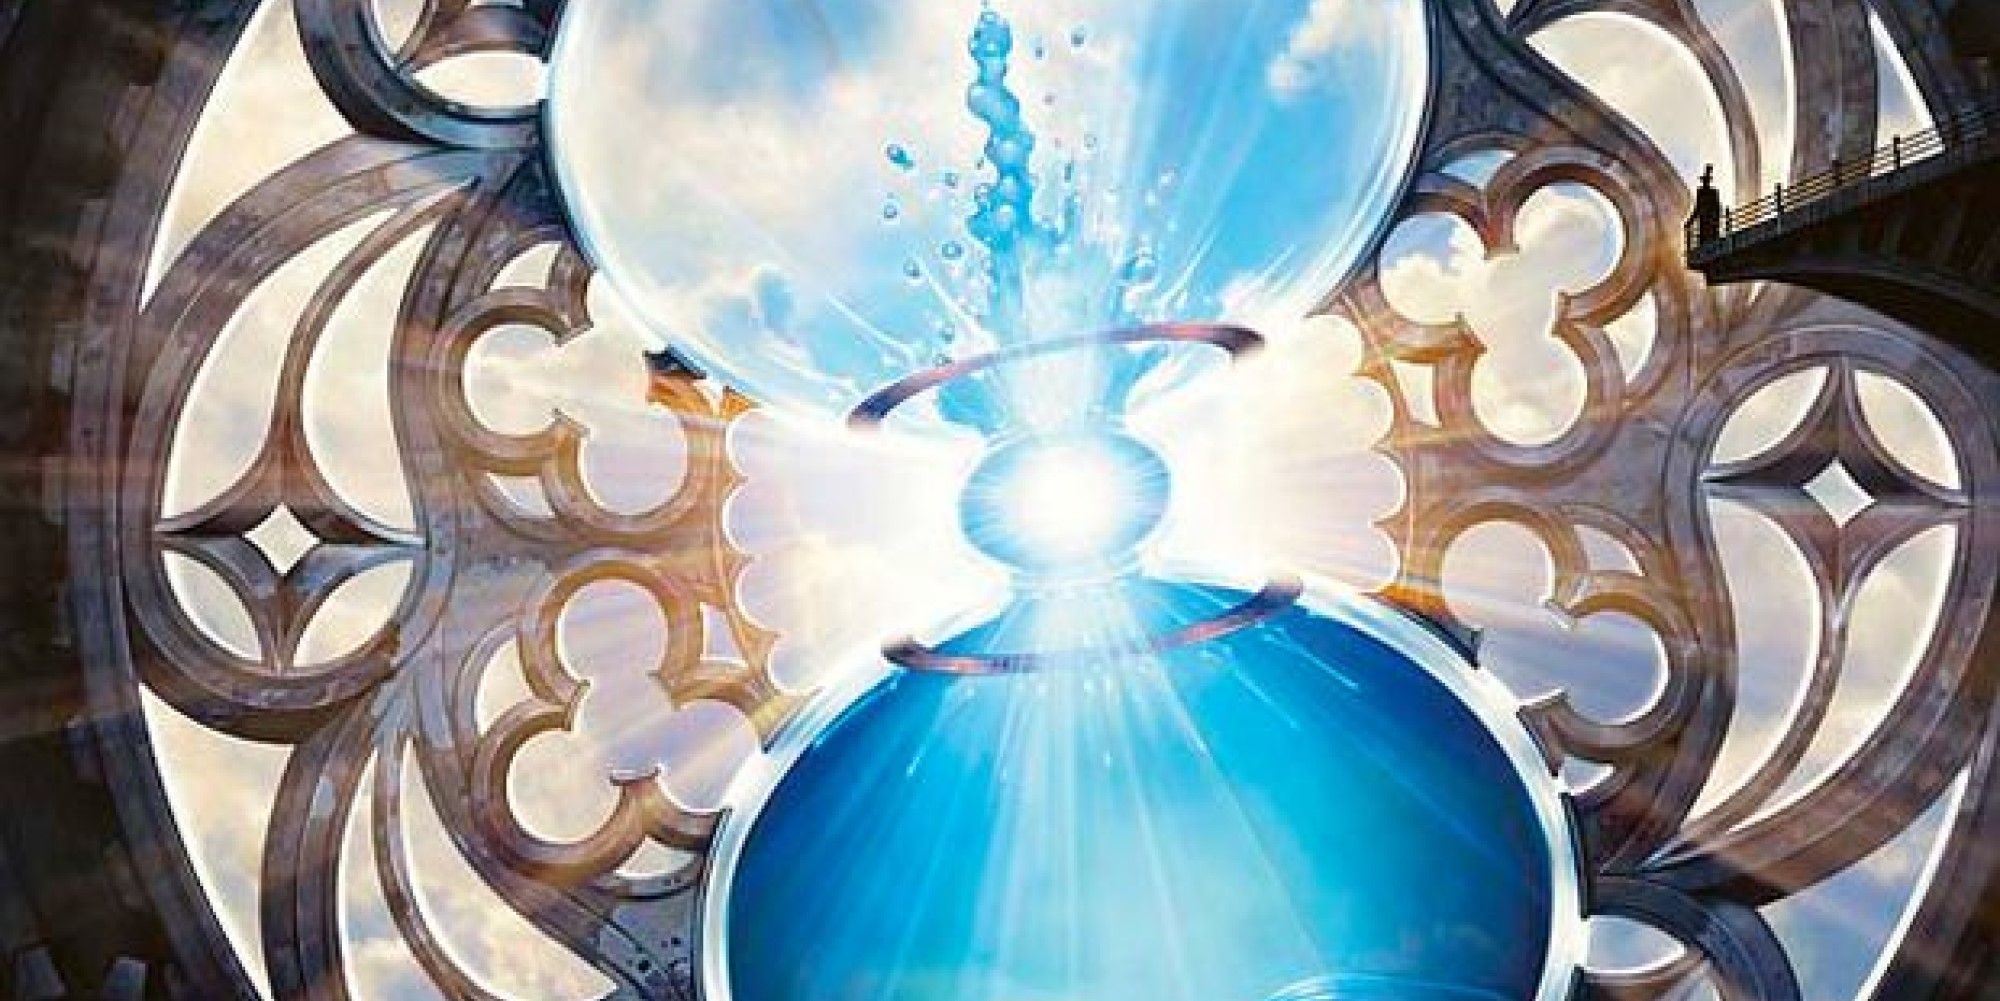 MTG A giant hourglass filled with blue liquid